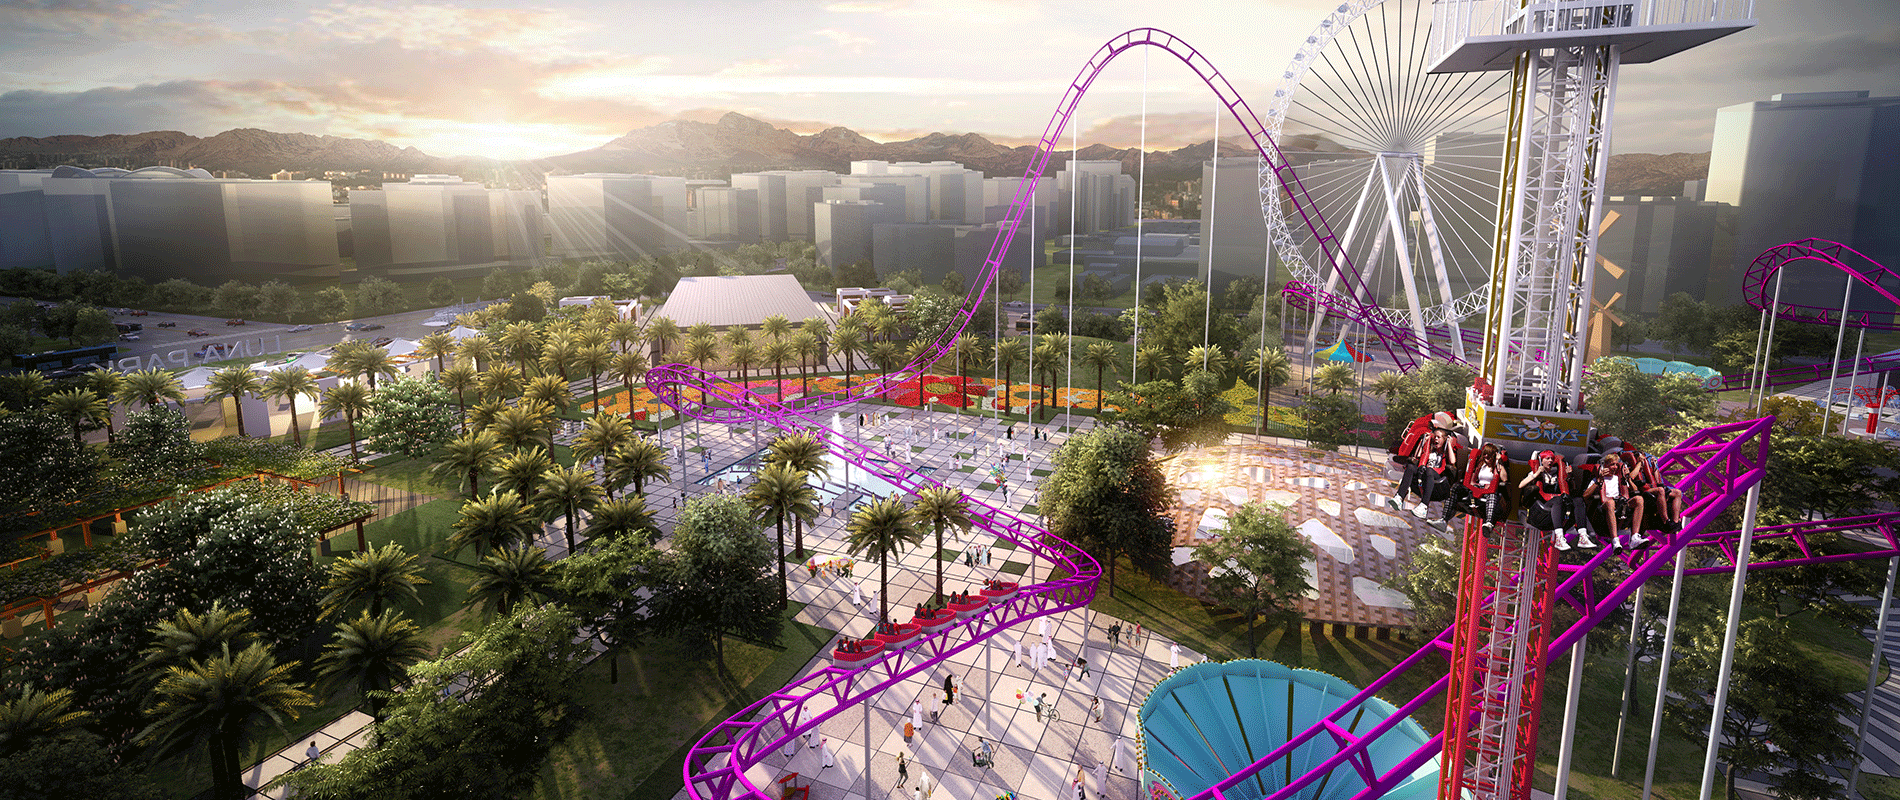 The best amusement parks in Taif ... 4 amusement parks - The best amusement parks in Taif ... 4 amusement parks in Taif for the perfect enthusiastic holiday you've always dreamed of